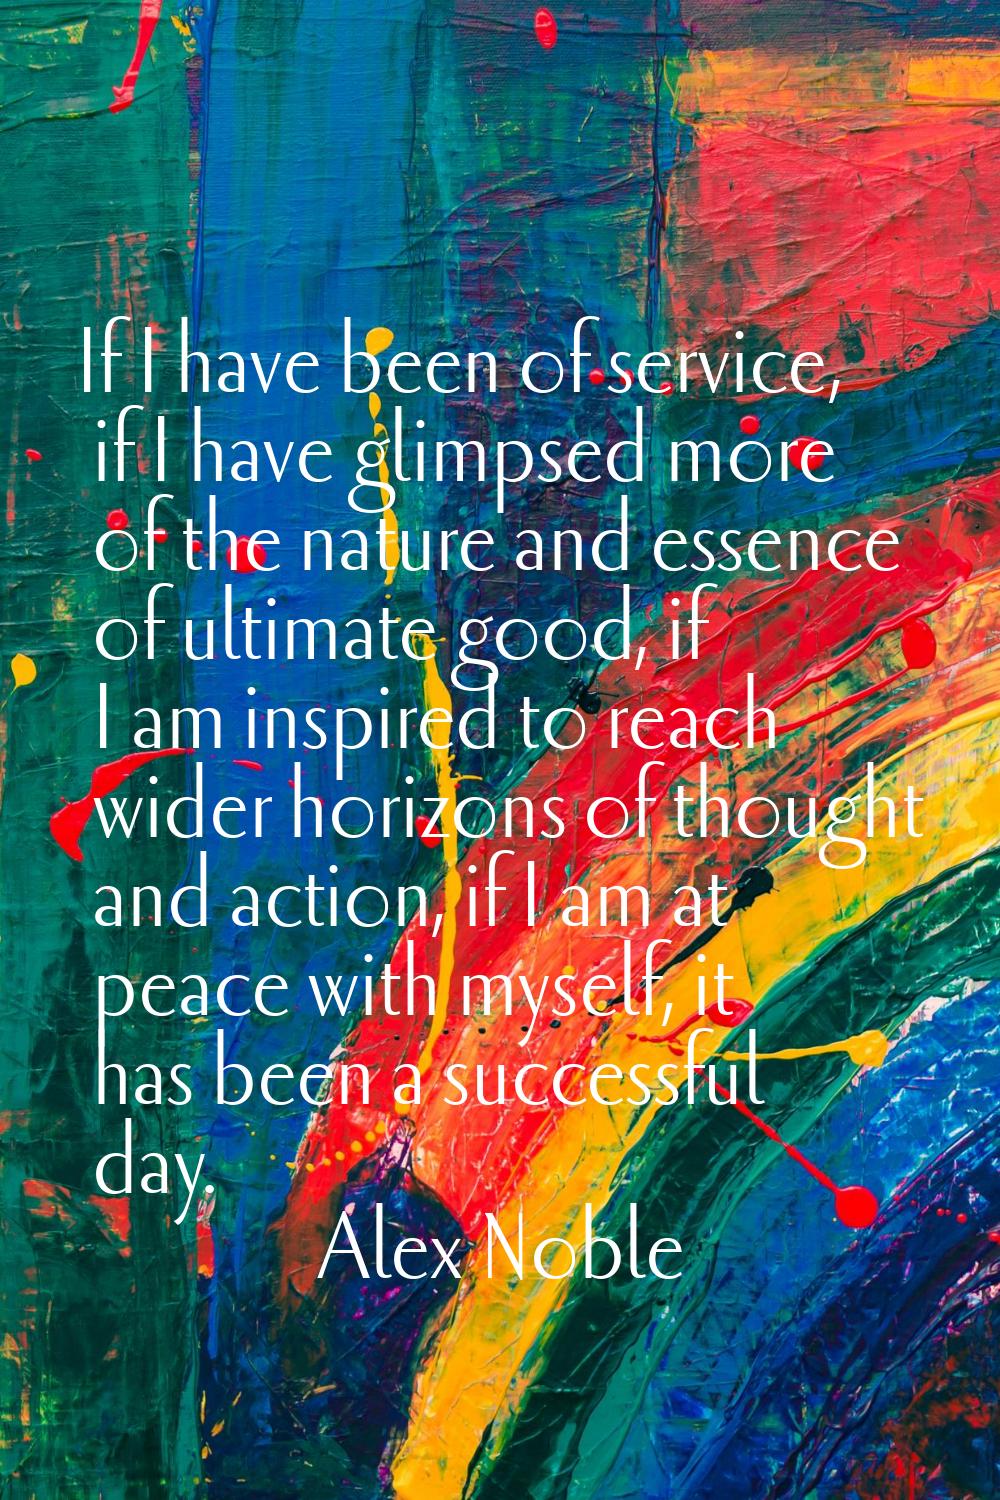 If I have been of service, if I have glimpsed more of the nature and essence of ultimate good, if I